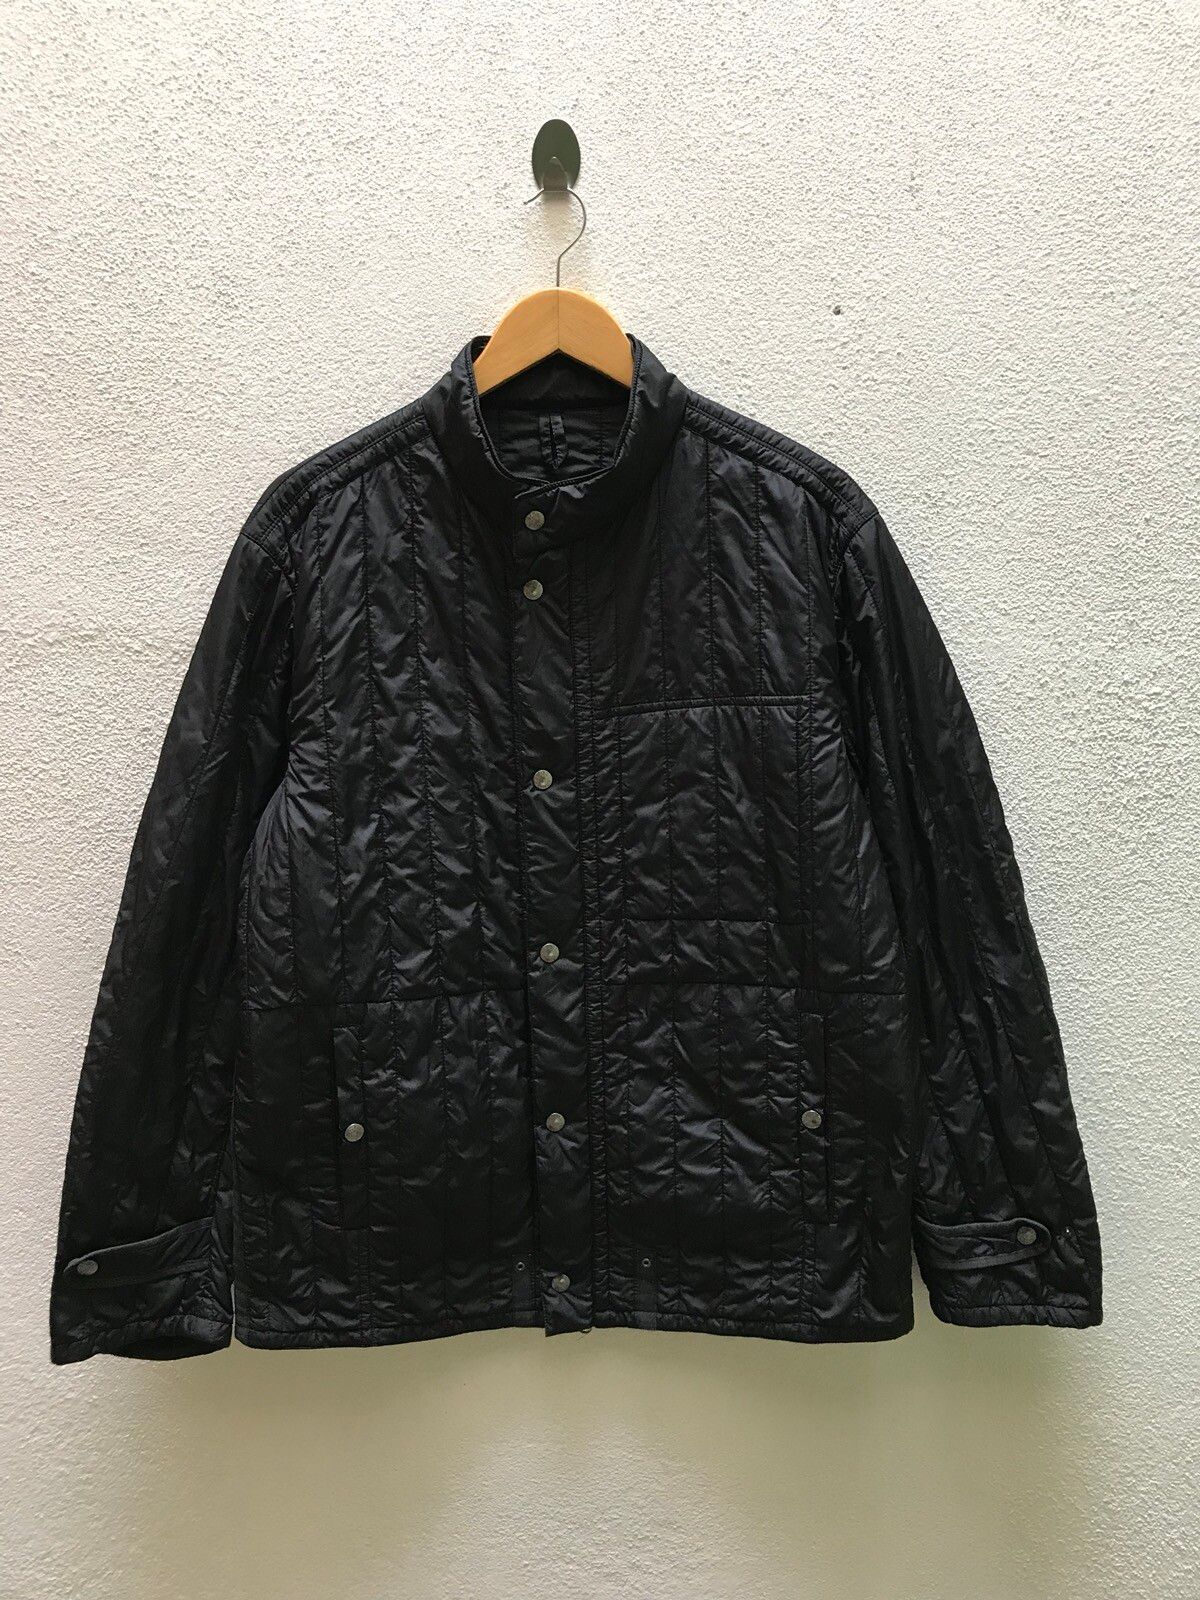 Japanese Brand 🔥💢 23 Homme Tokyo Vingt Trois Quilted Jacket | Grailed